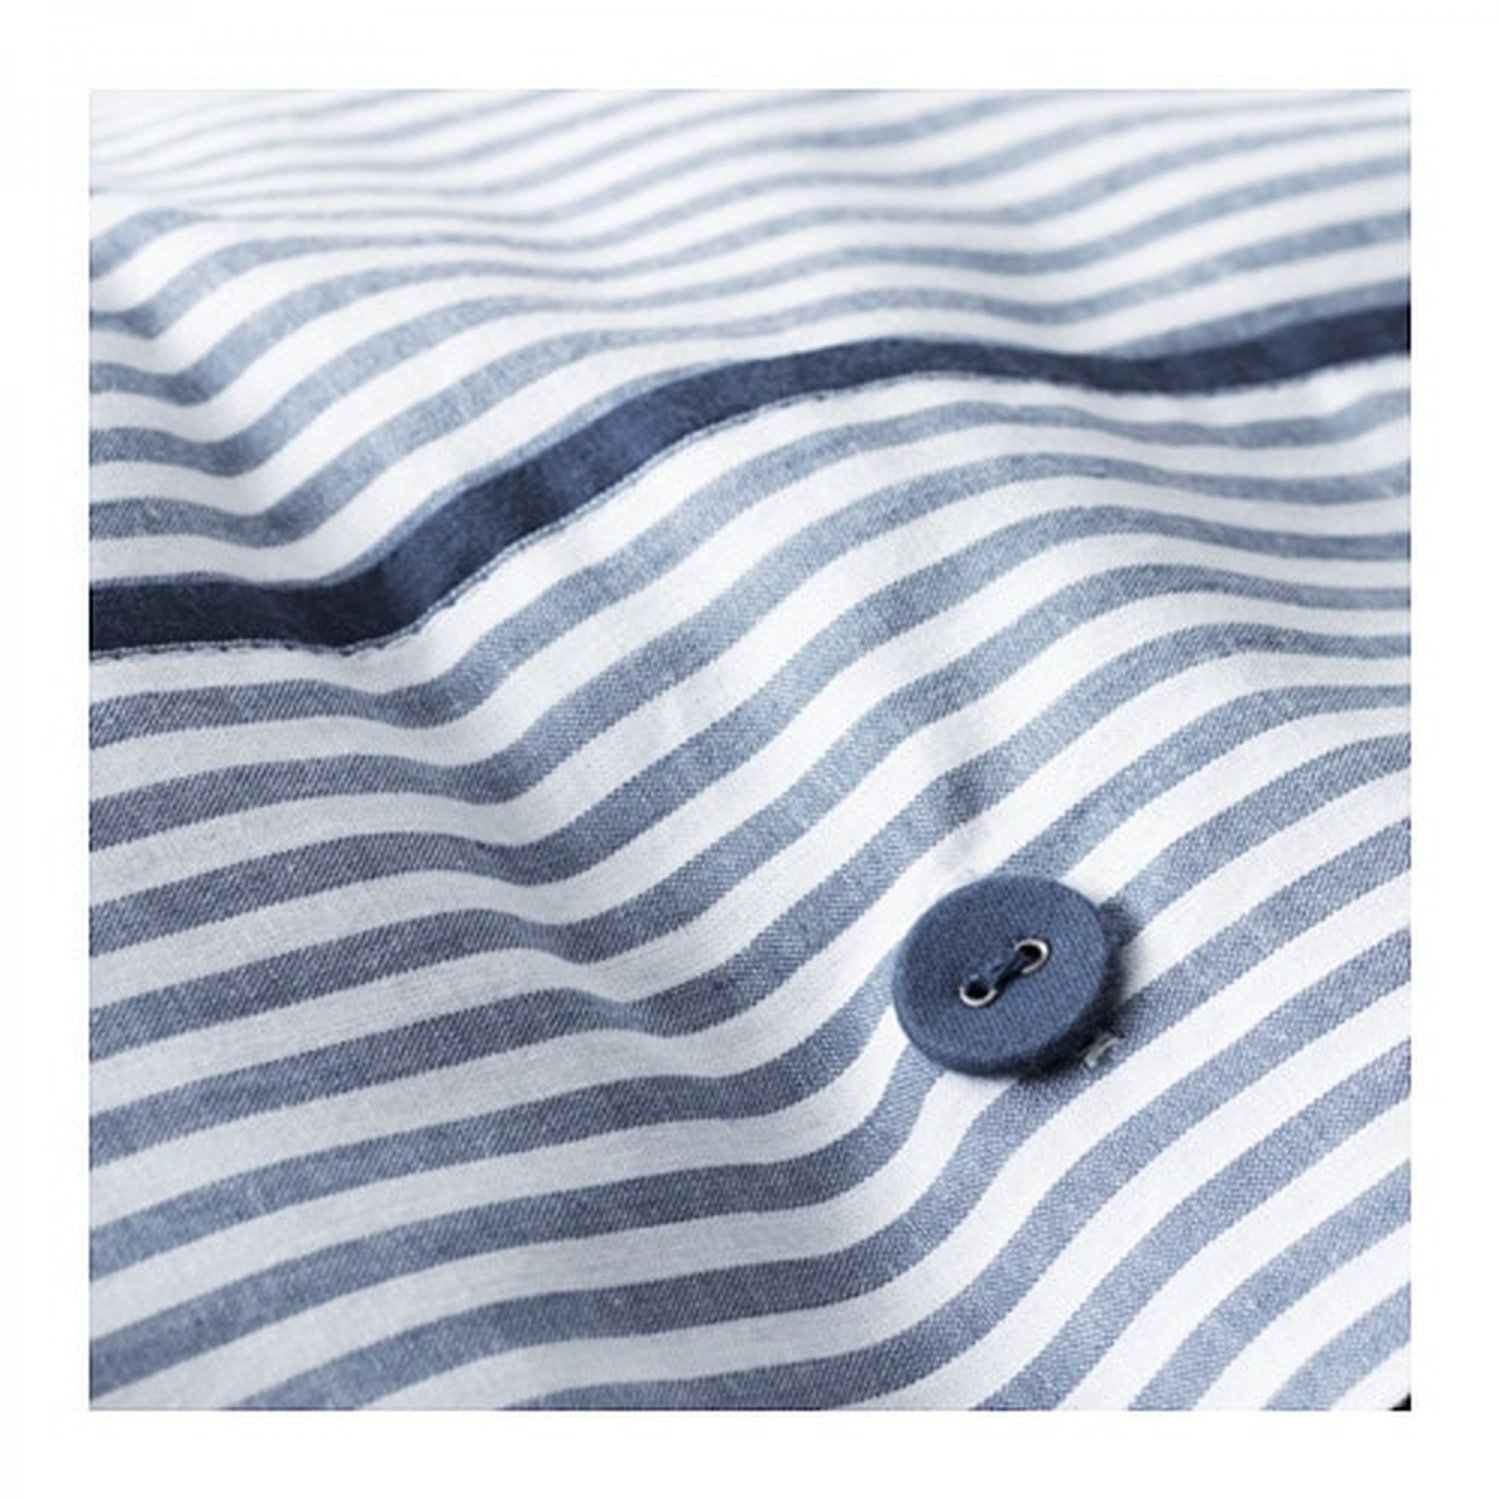 IKEA Nyponros QUEEN Full DUVET COVER Set TICKING STRIPES BLUE Yarn Dyed ...